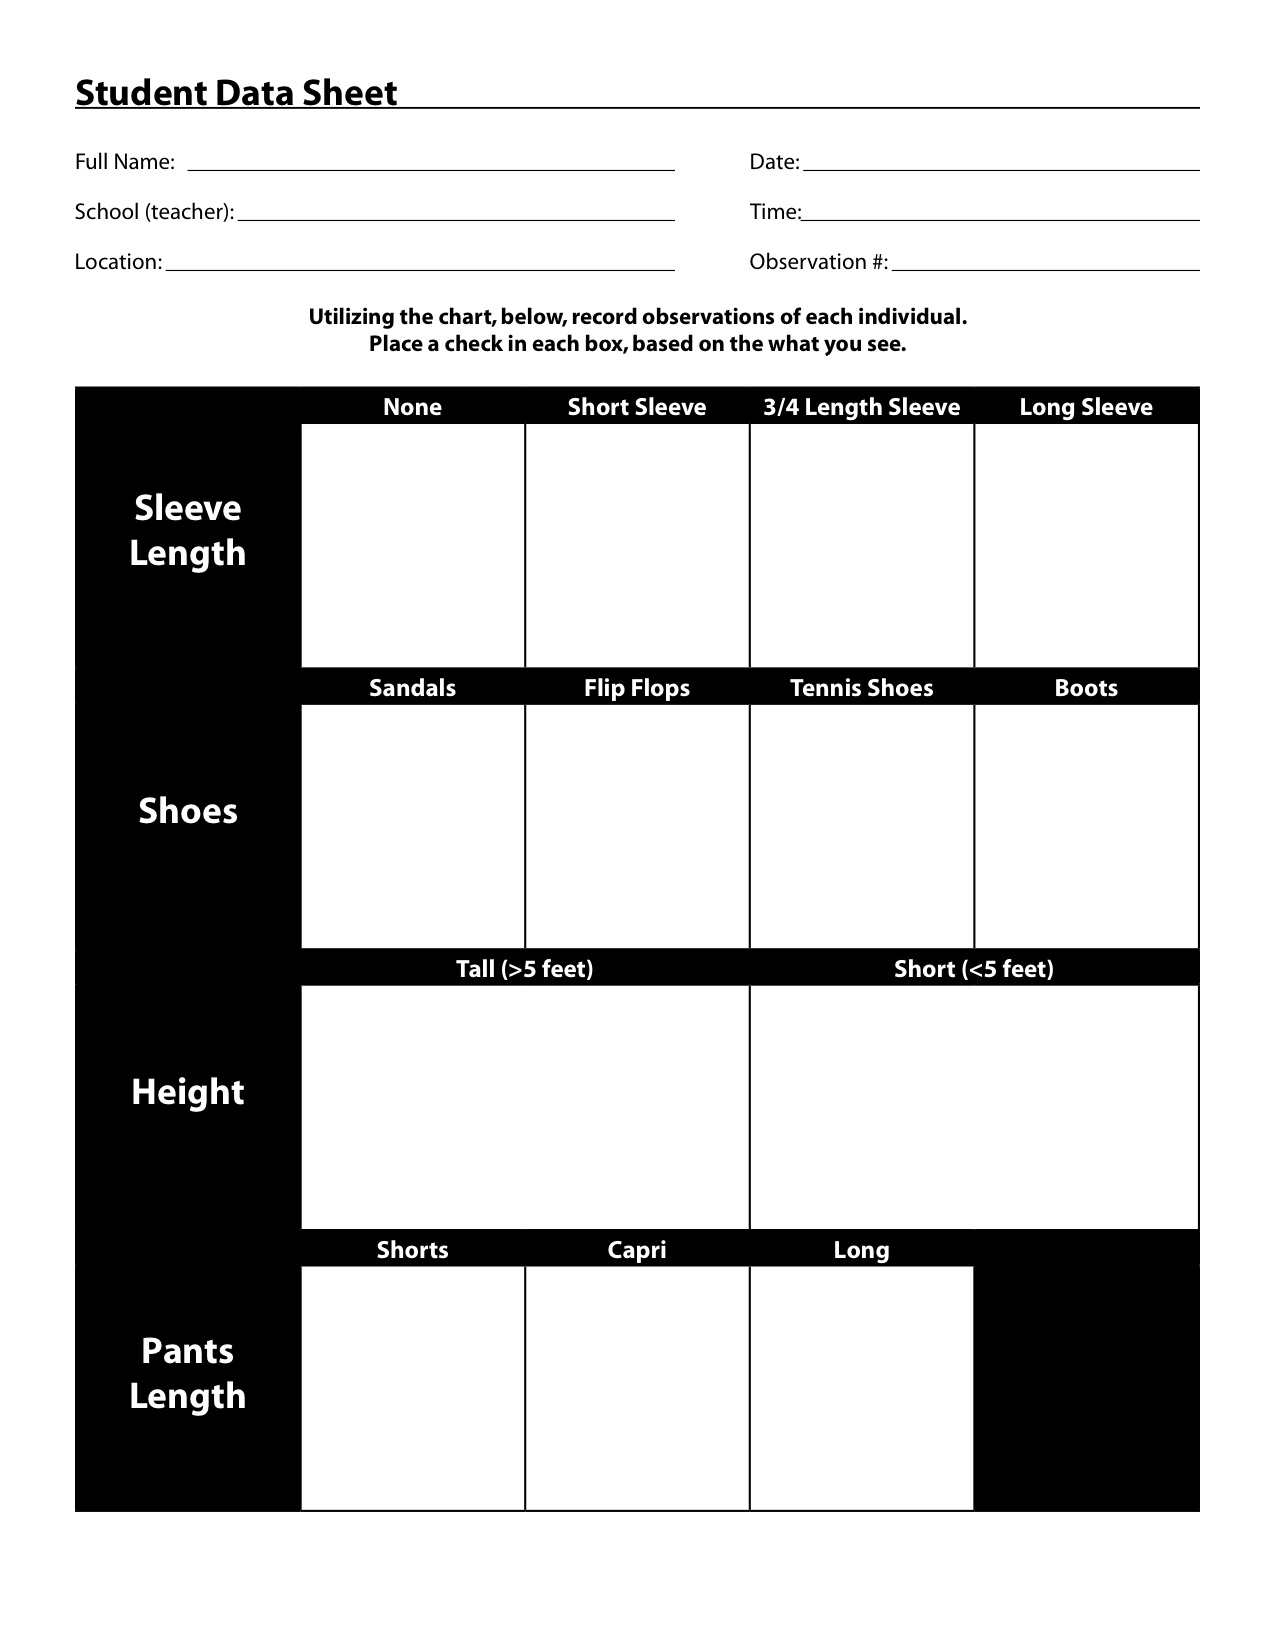 Student Data Collection Sheet Image